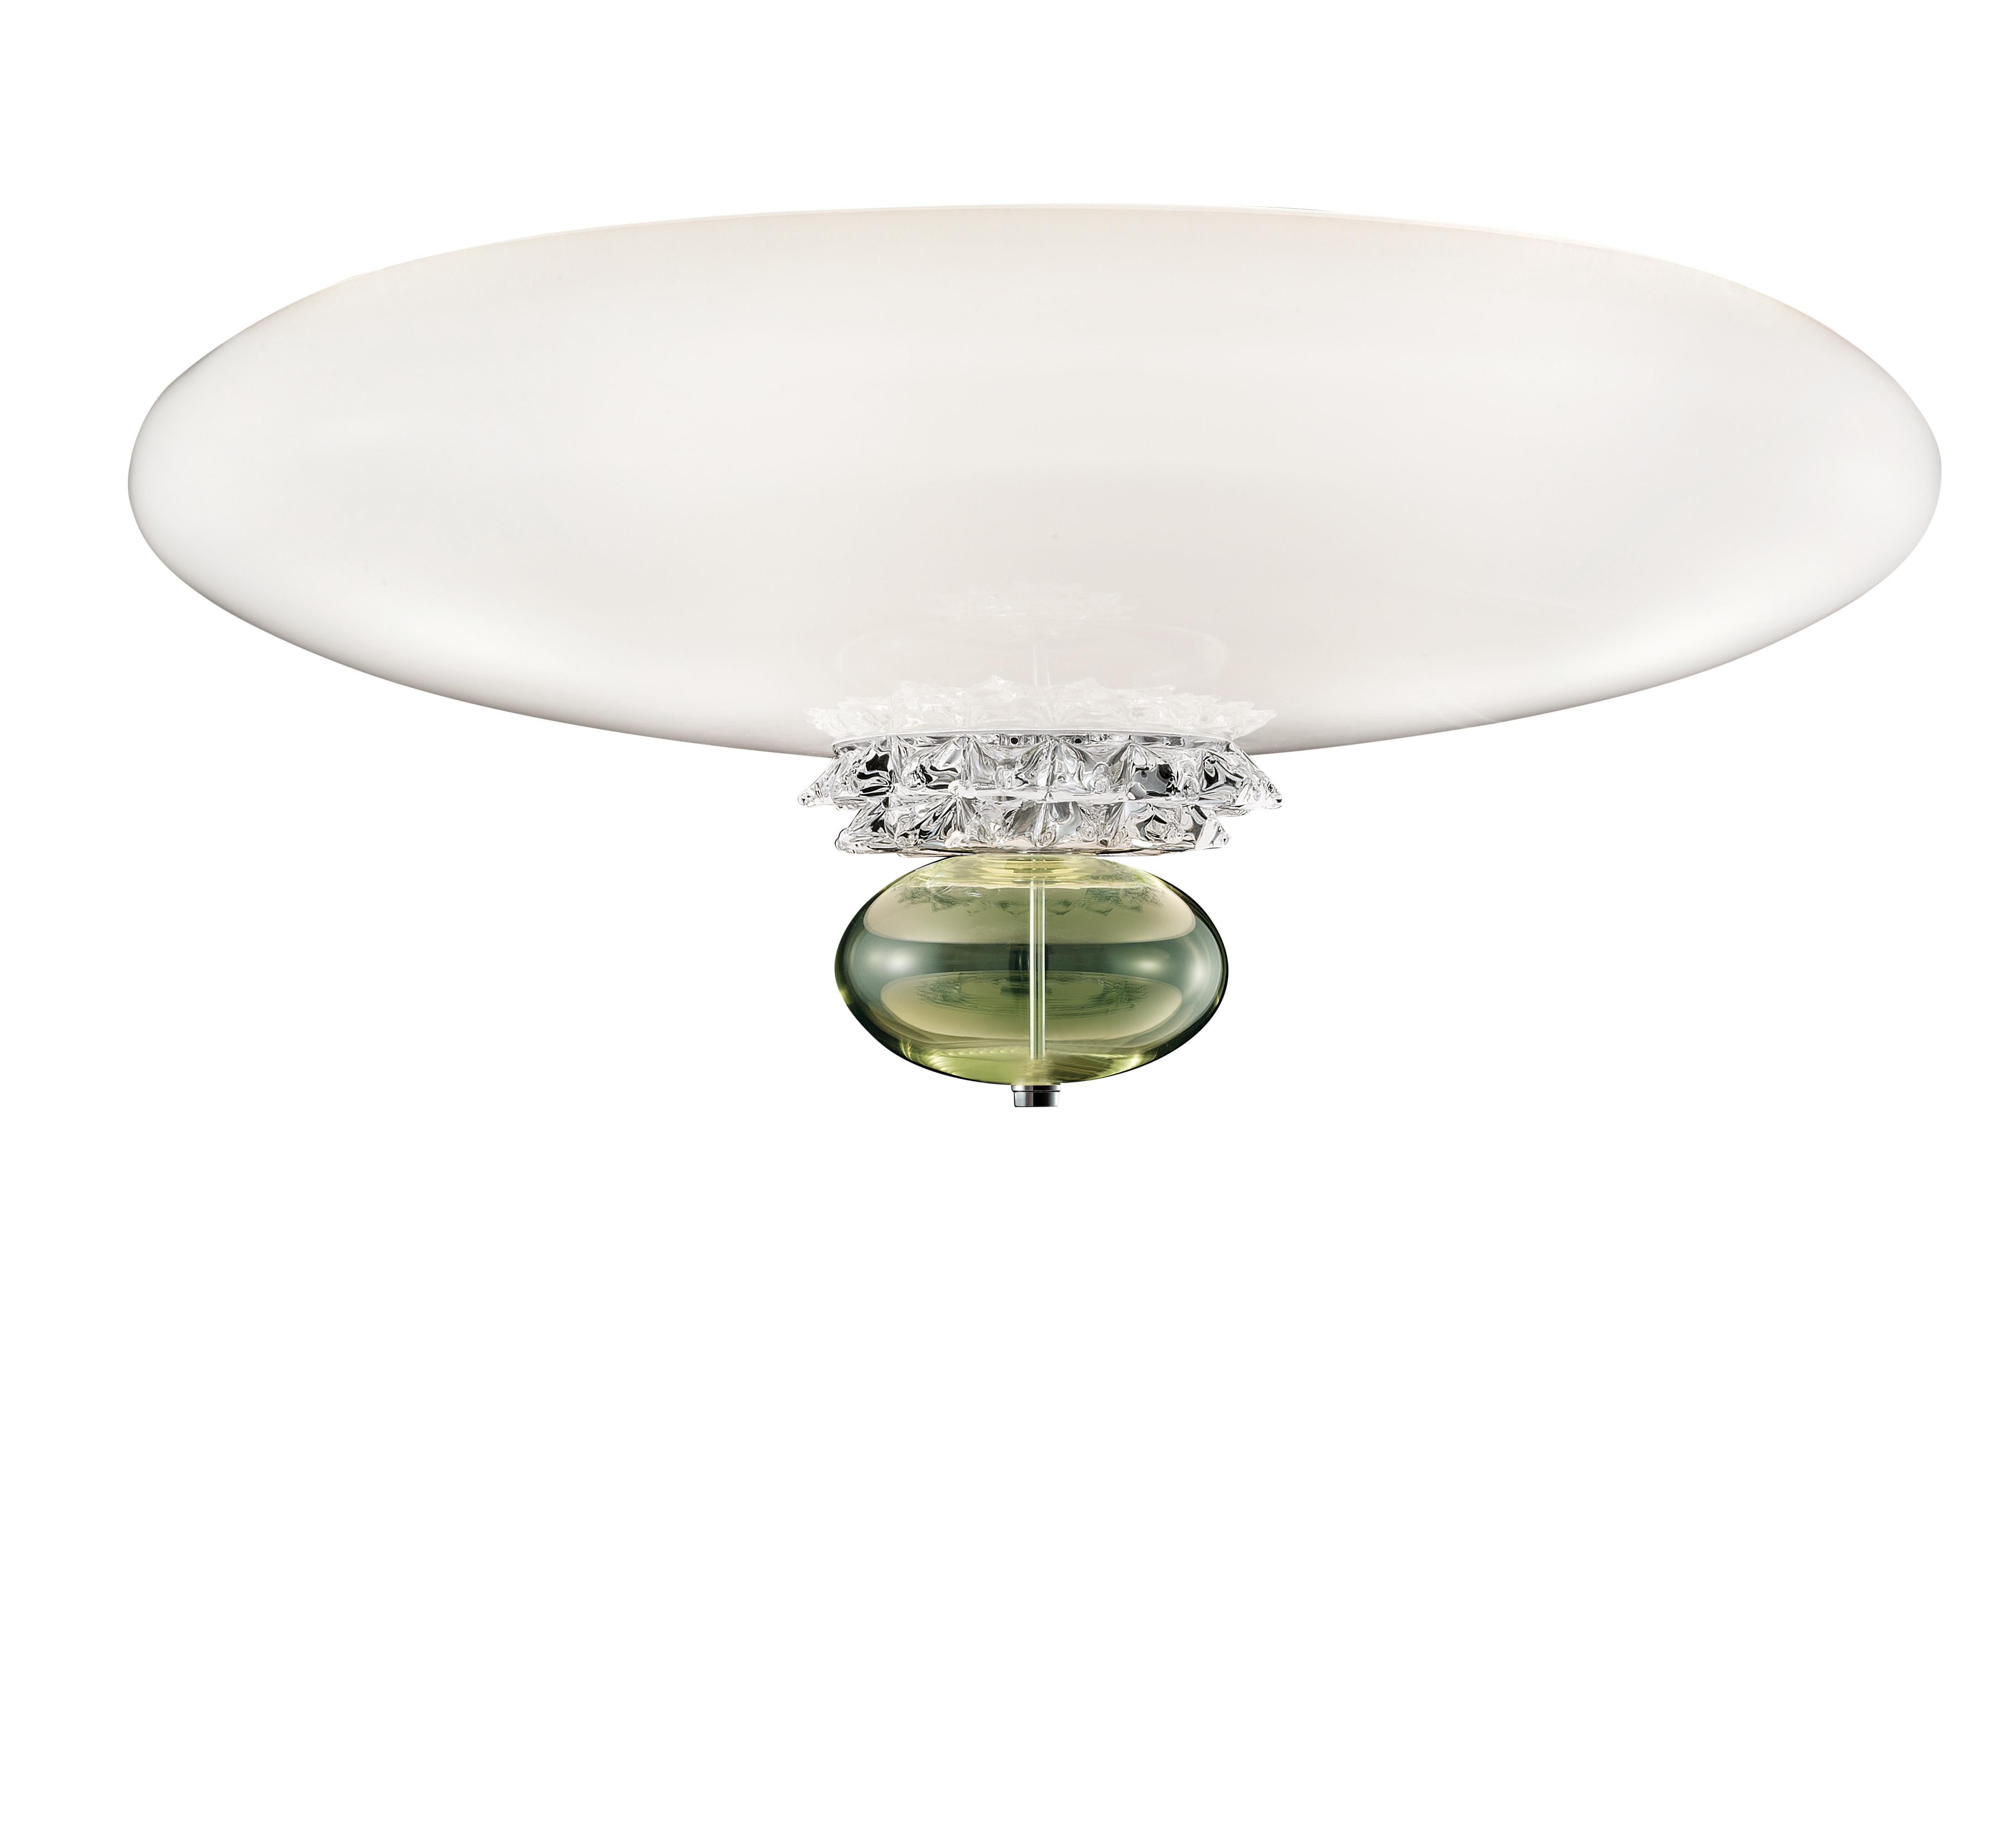 Green (Liquid Citron/White_BE) Anversa 5698 Ceiling Lamp in Chrome and Glass, by Barovier&Toso